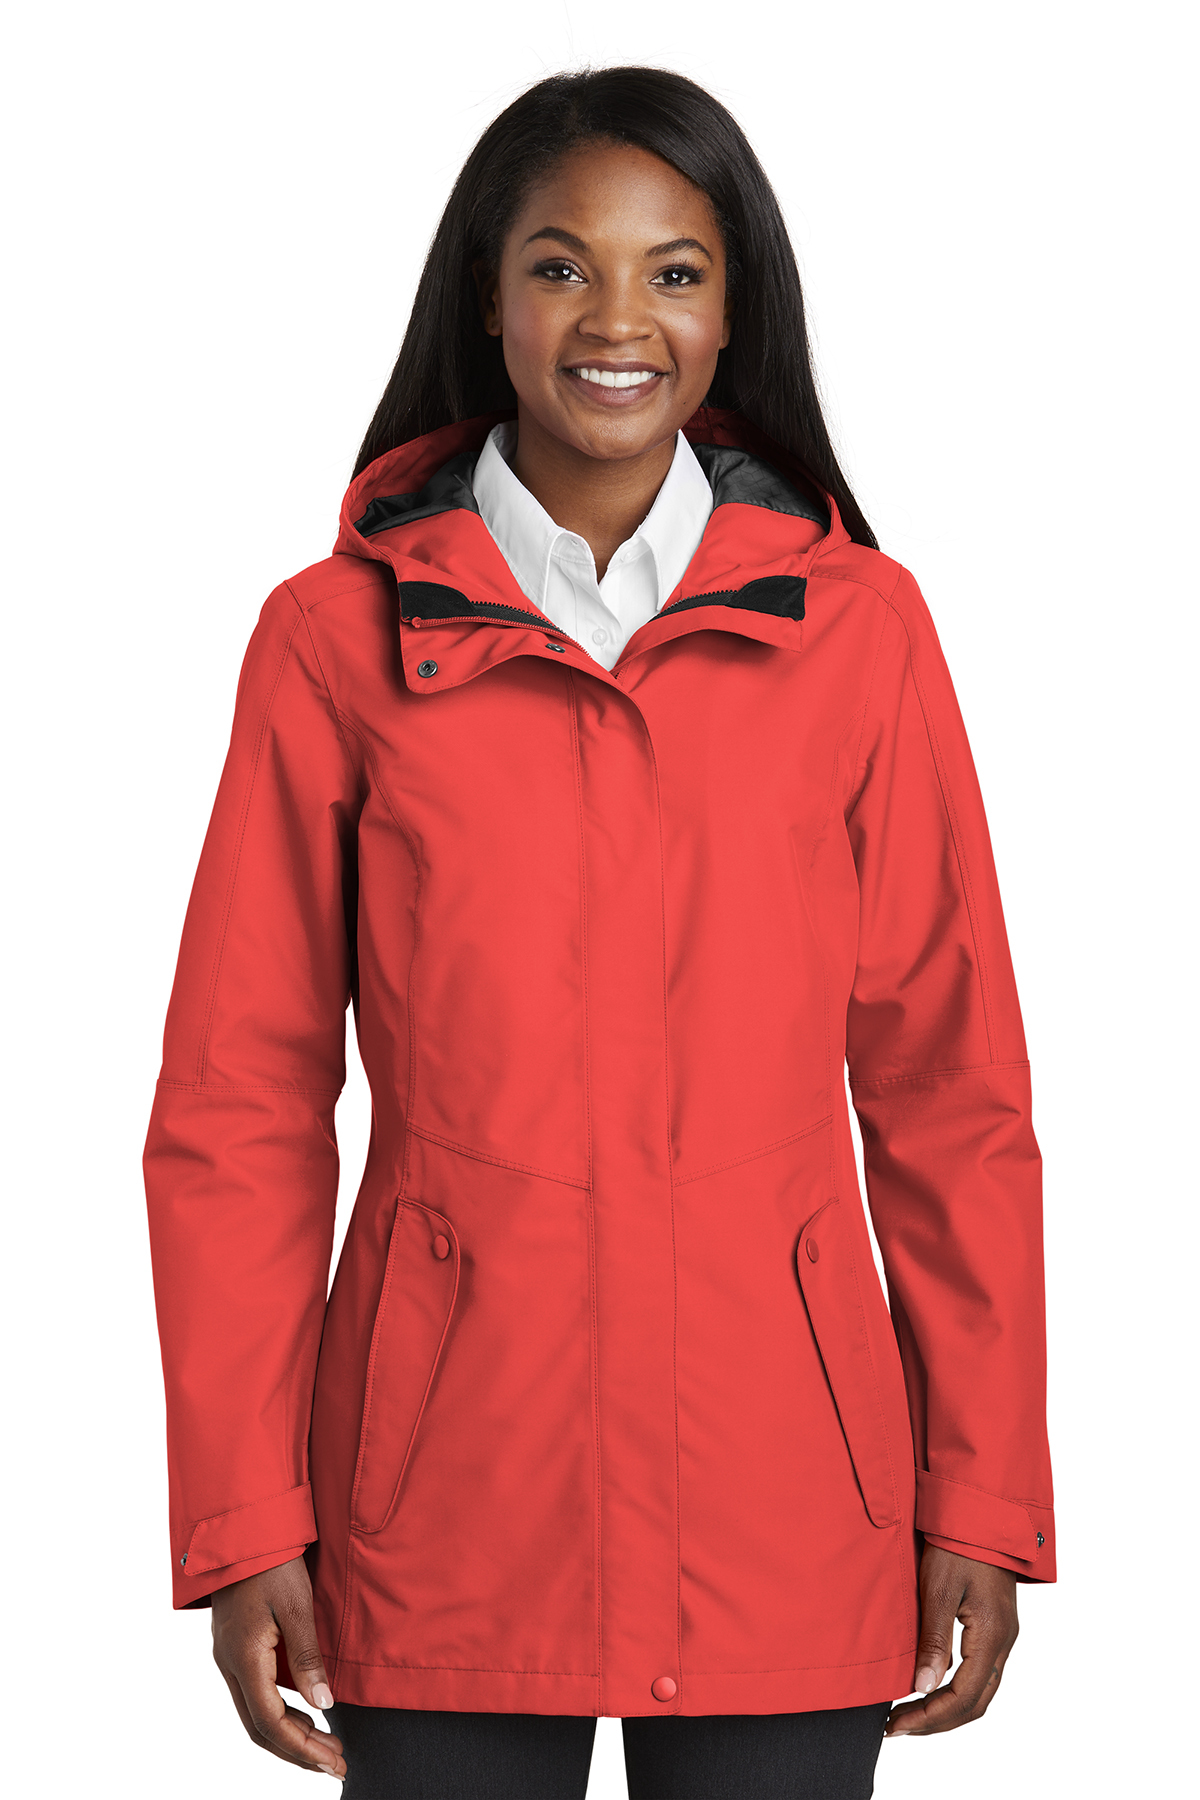 Port Authority L900 - Ladies Collective Outer Shell Jacket